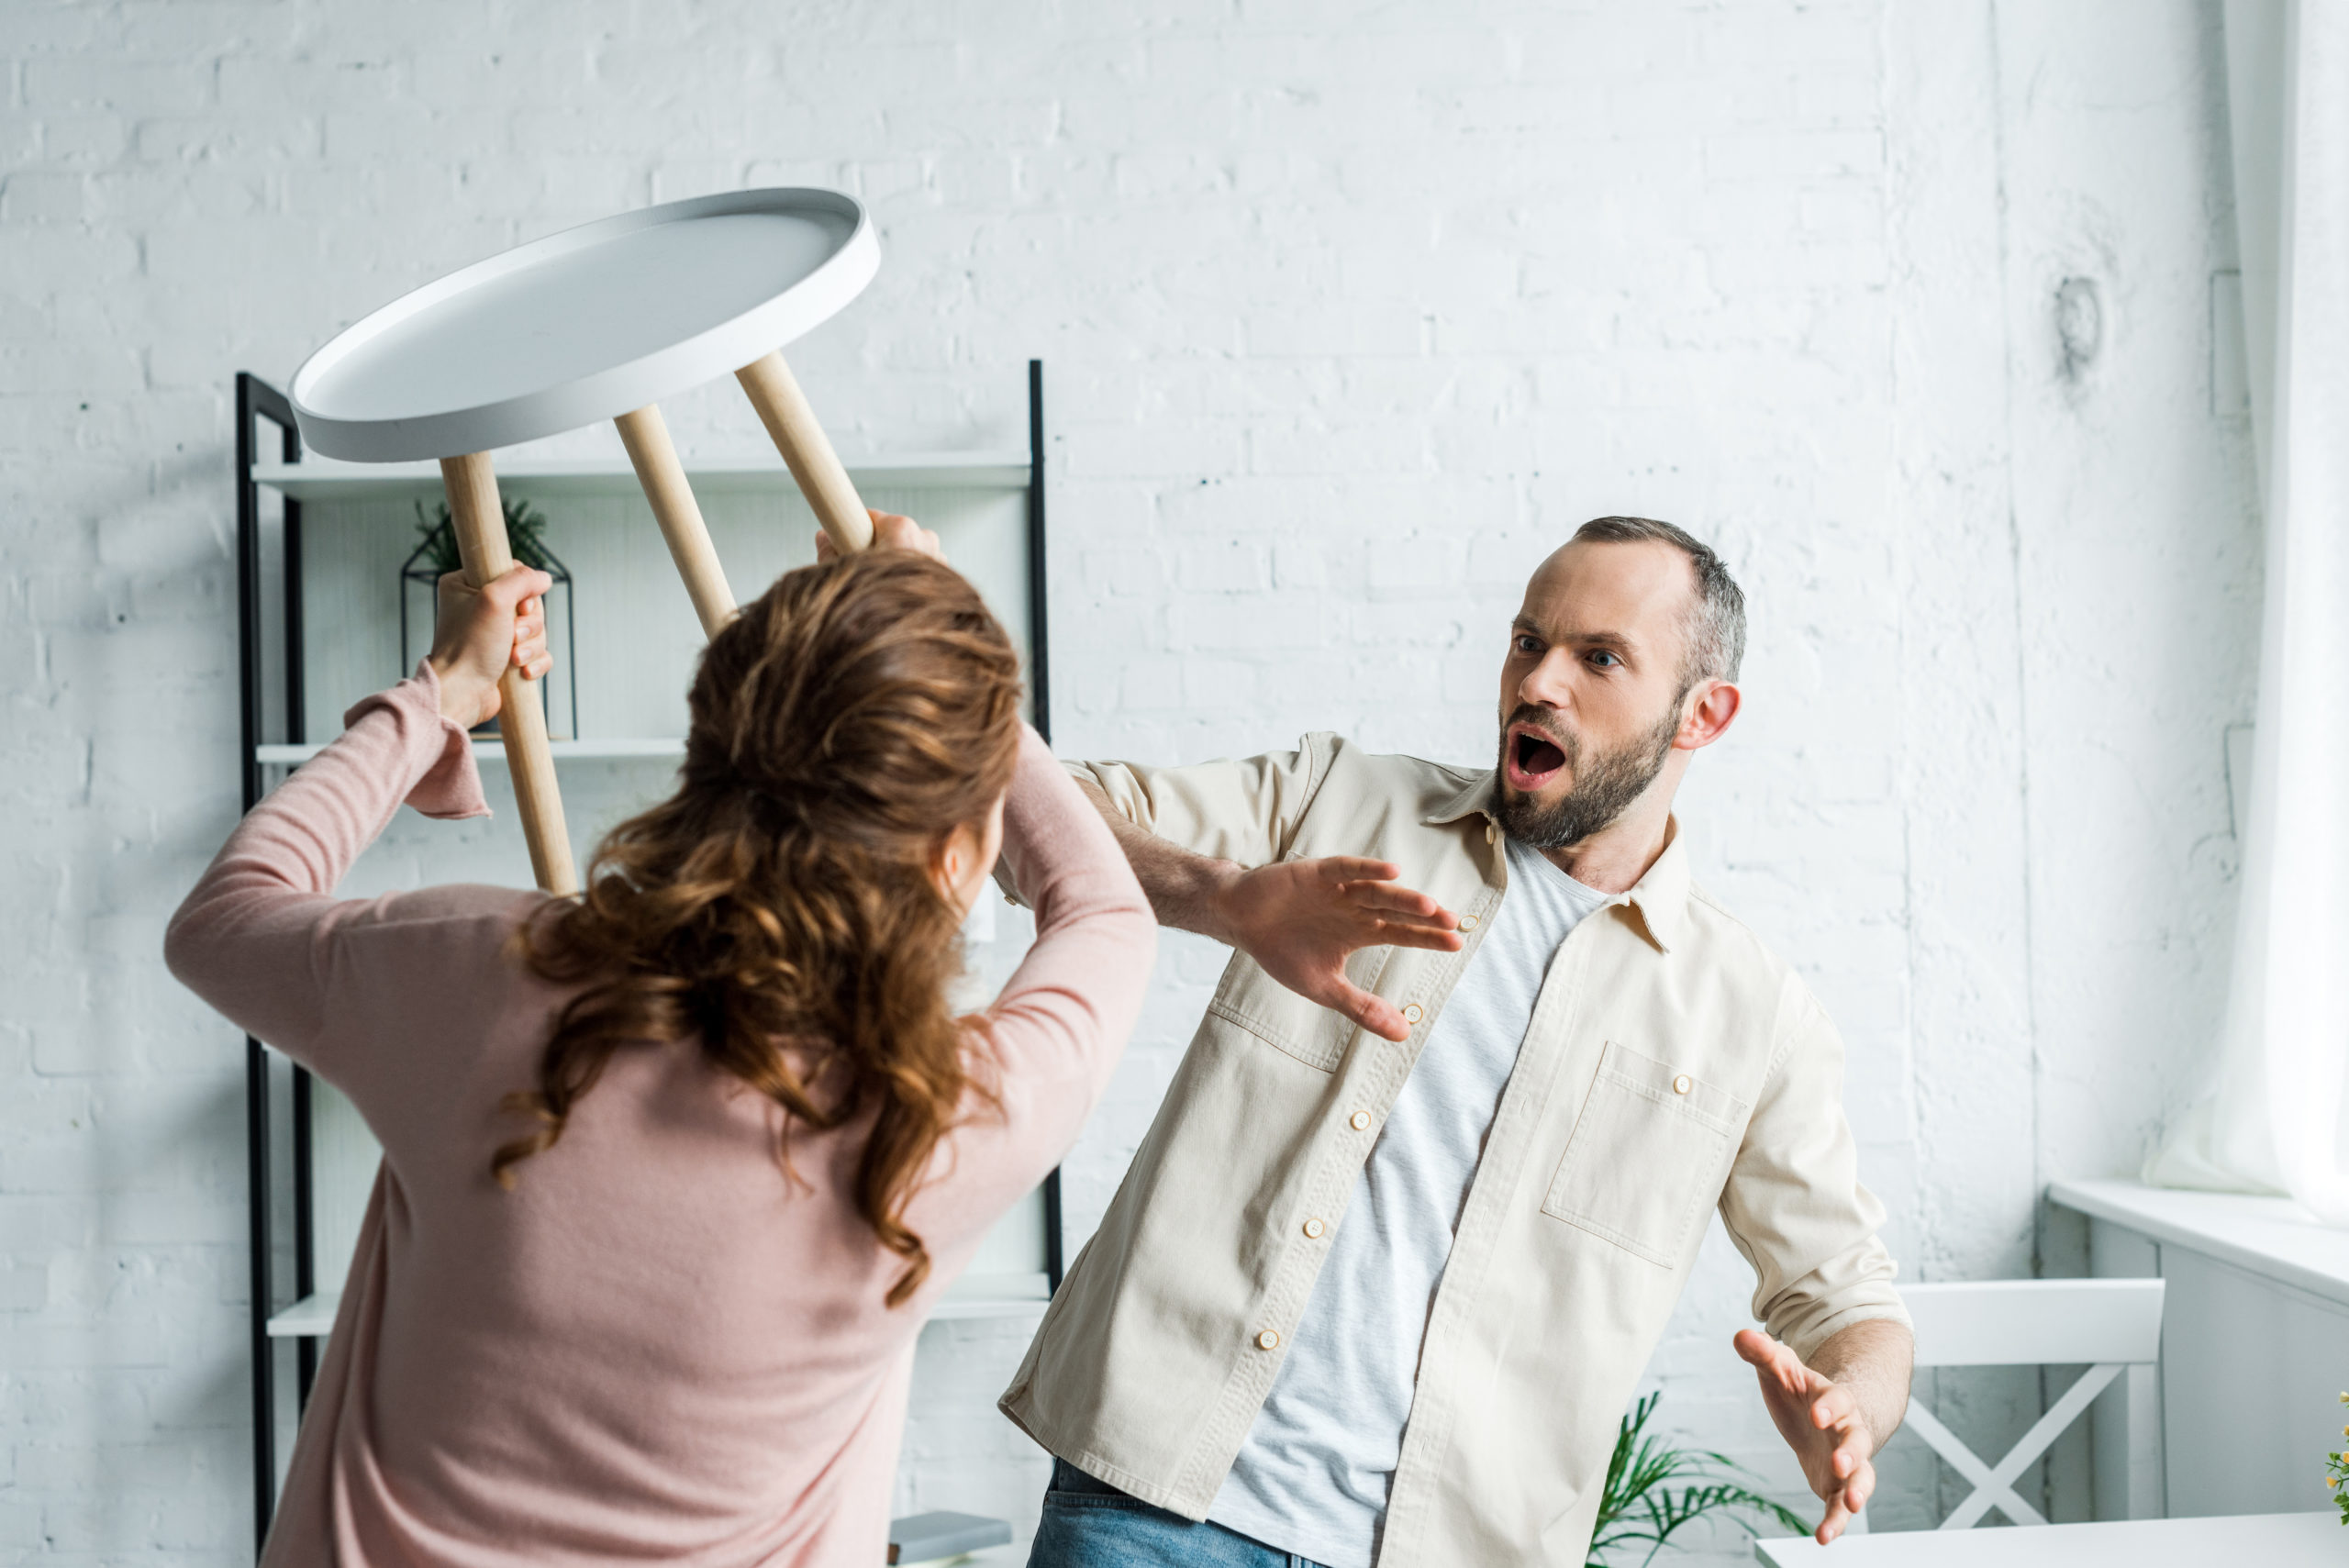 defensive man looking at angry woman throwing a stool